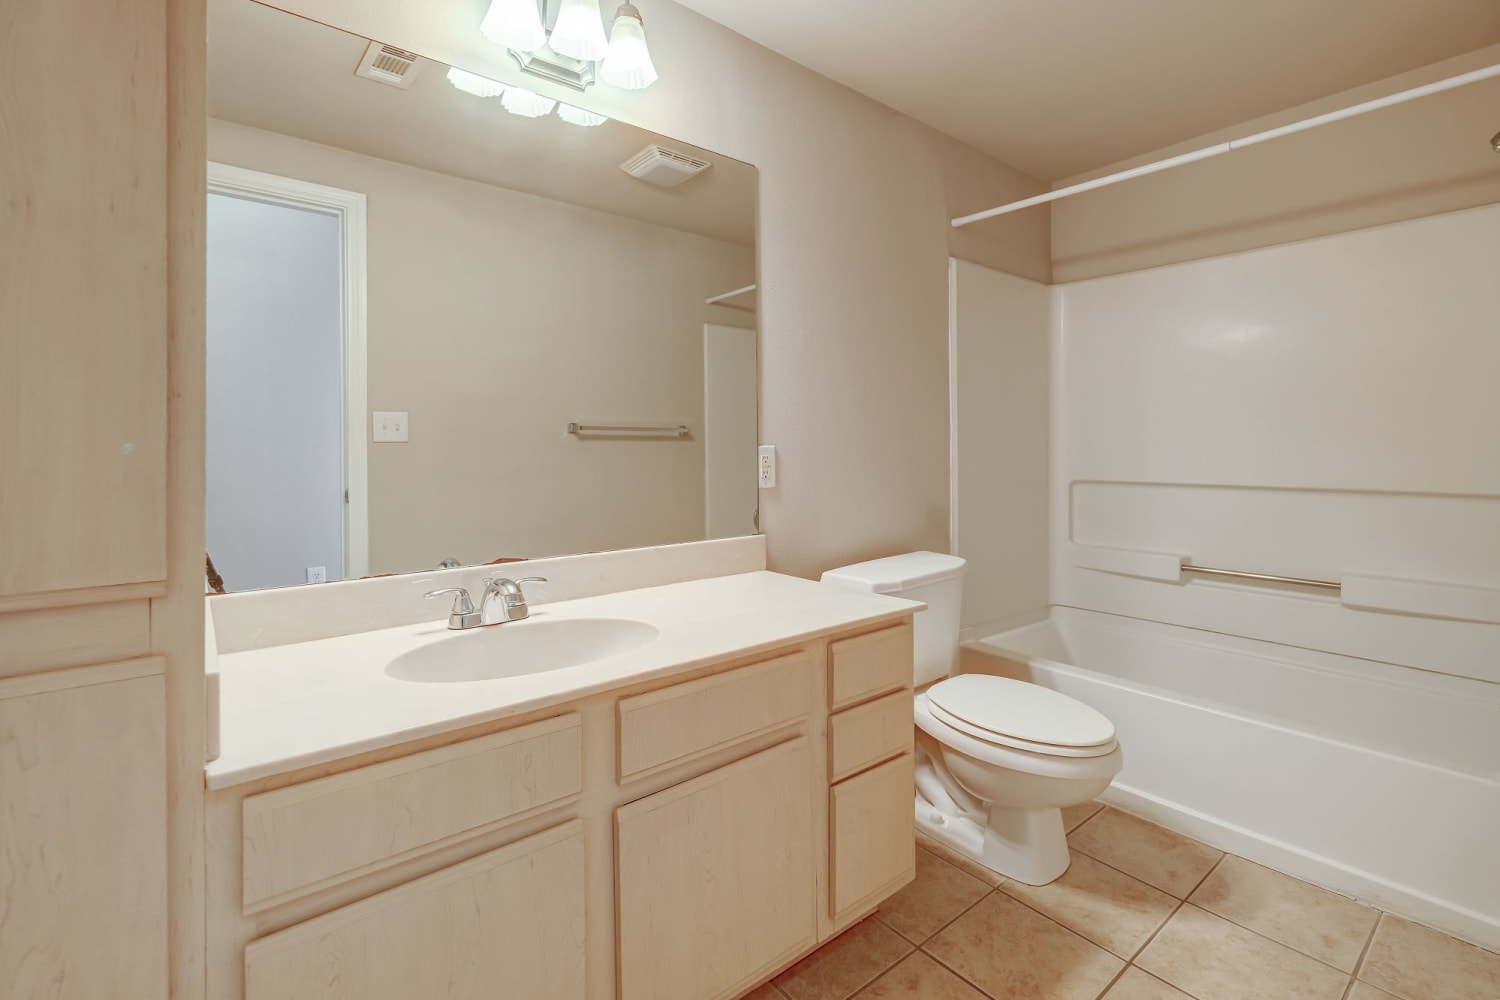 Bright bathroom with bathtub at Chateau des Lions Apartment Homes in Lafayette, Louisiana